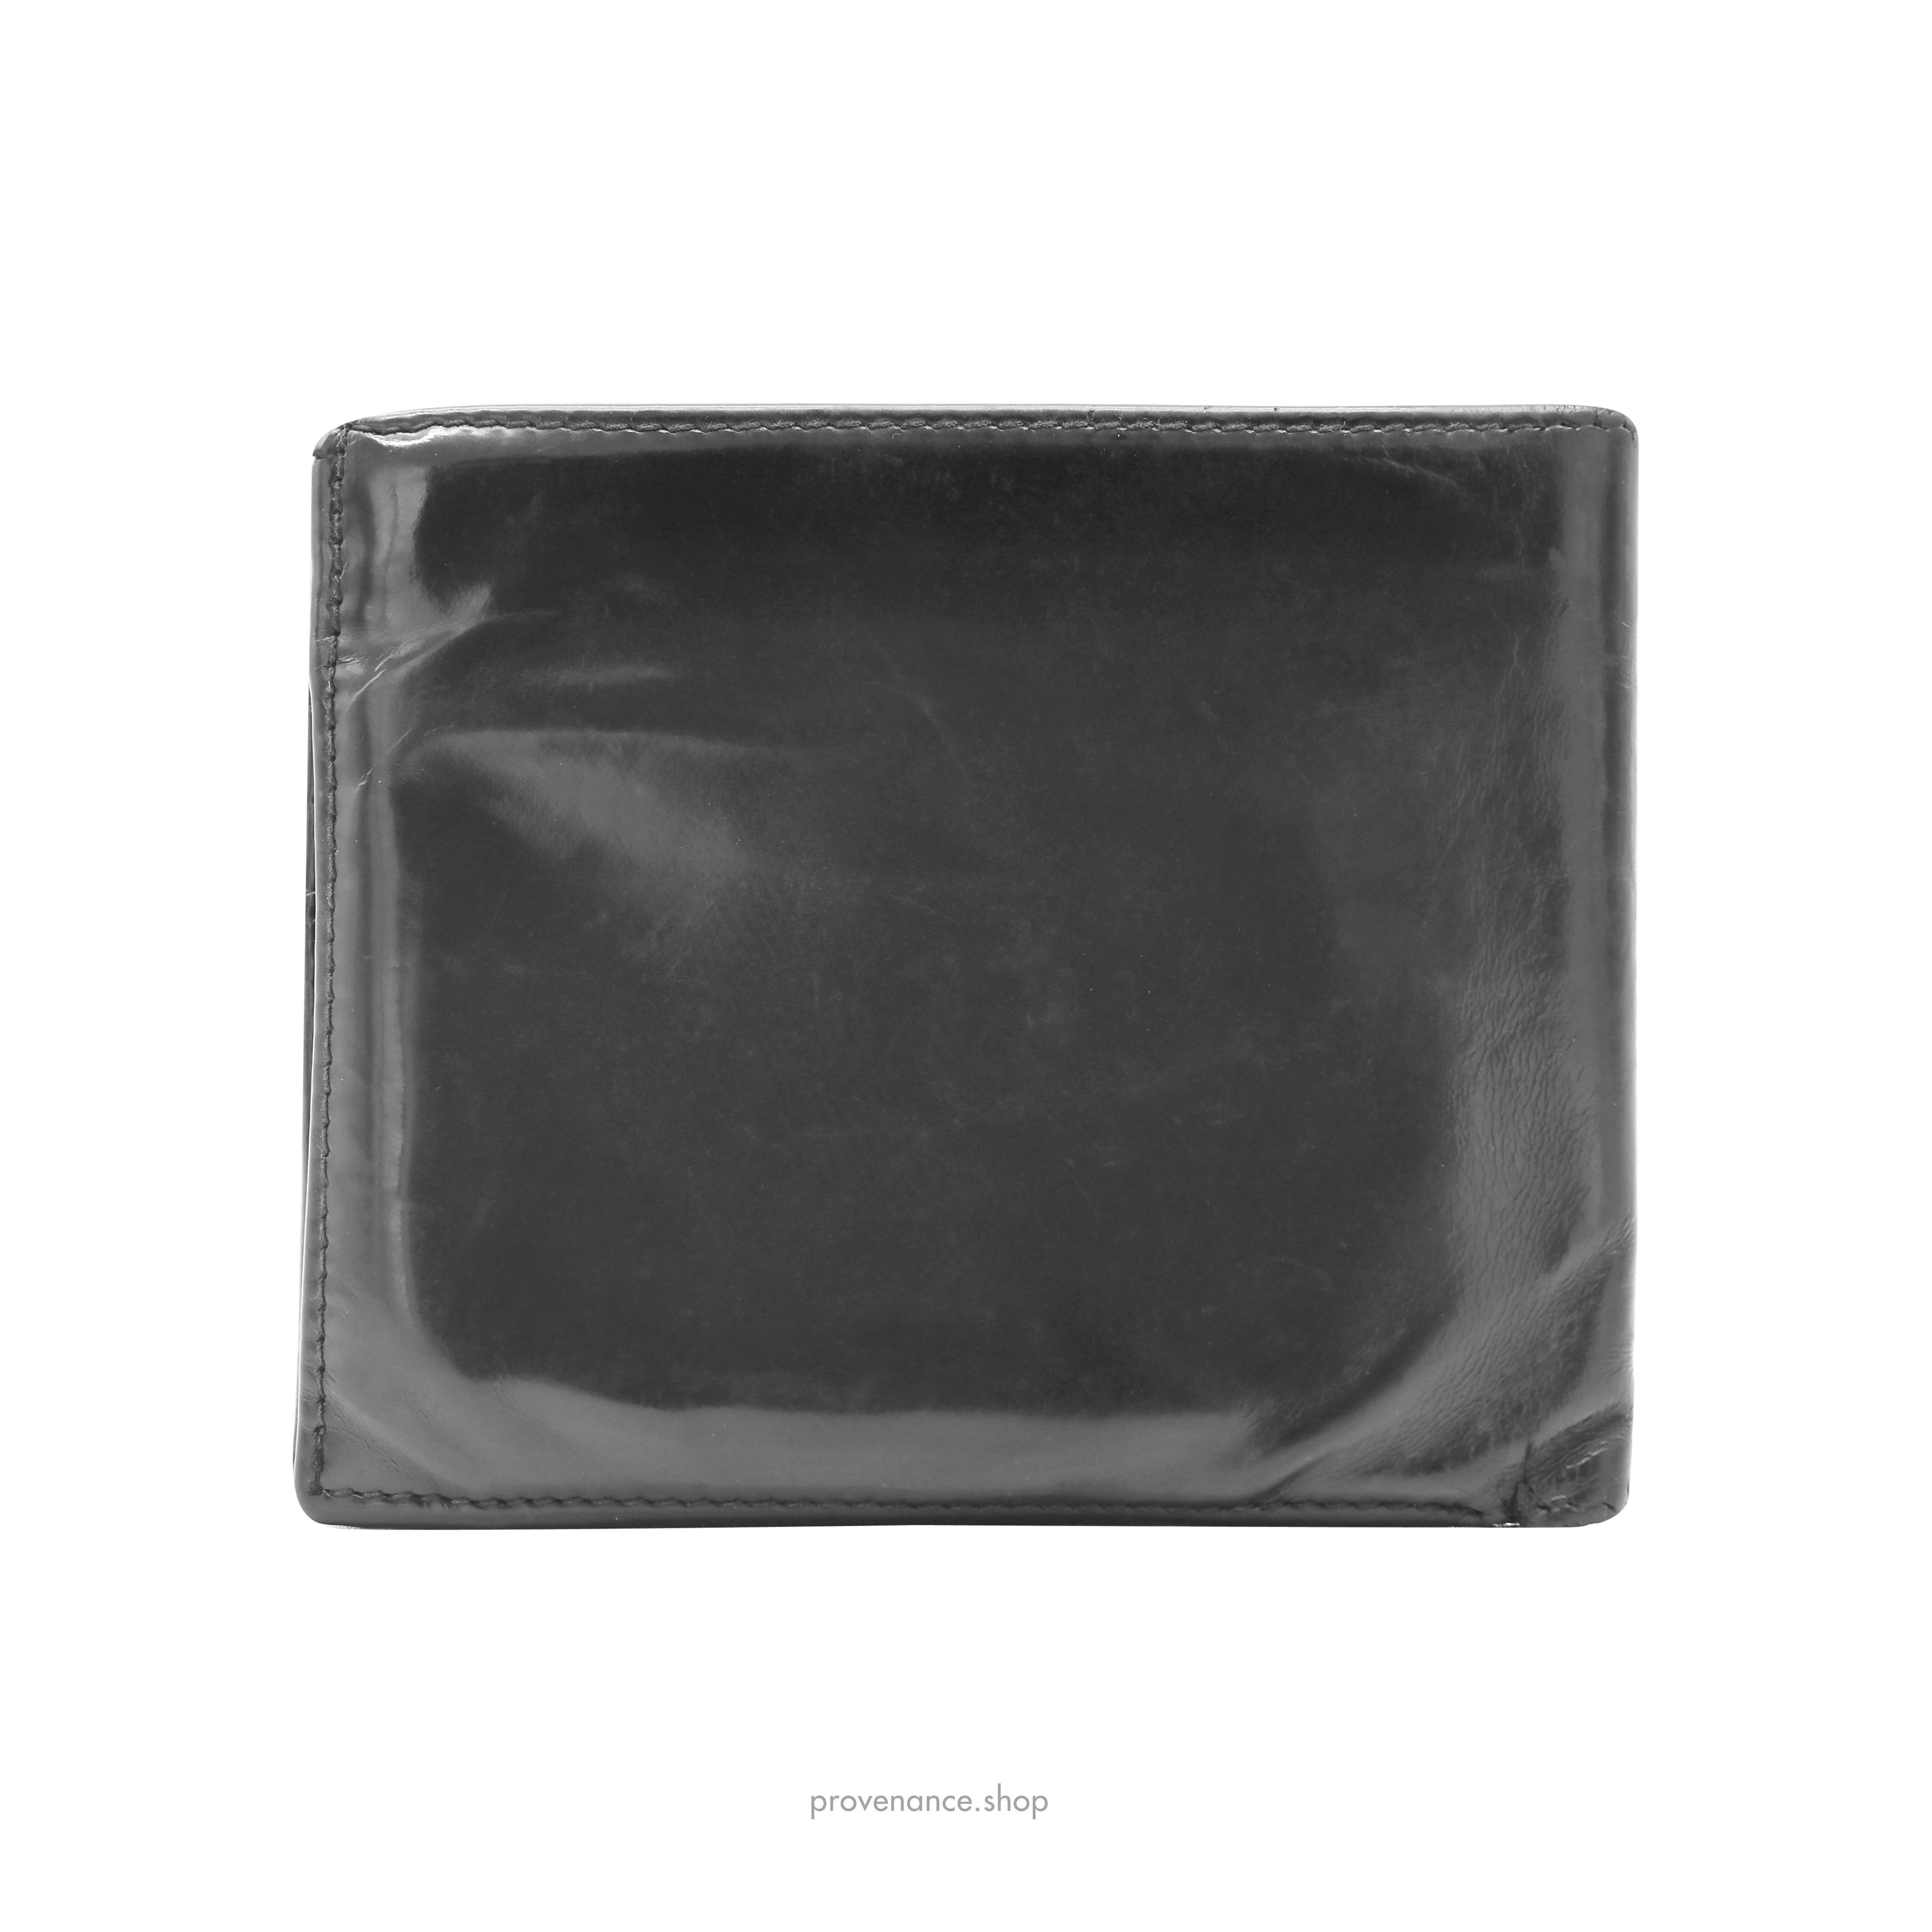 Bifold Wallet - Black Patent Leather - 2